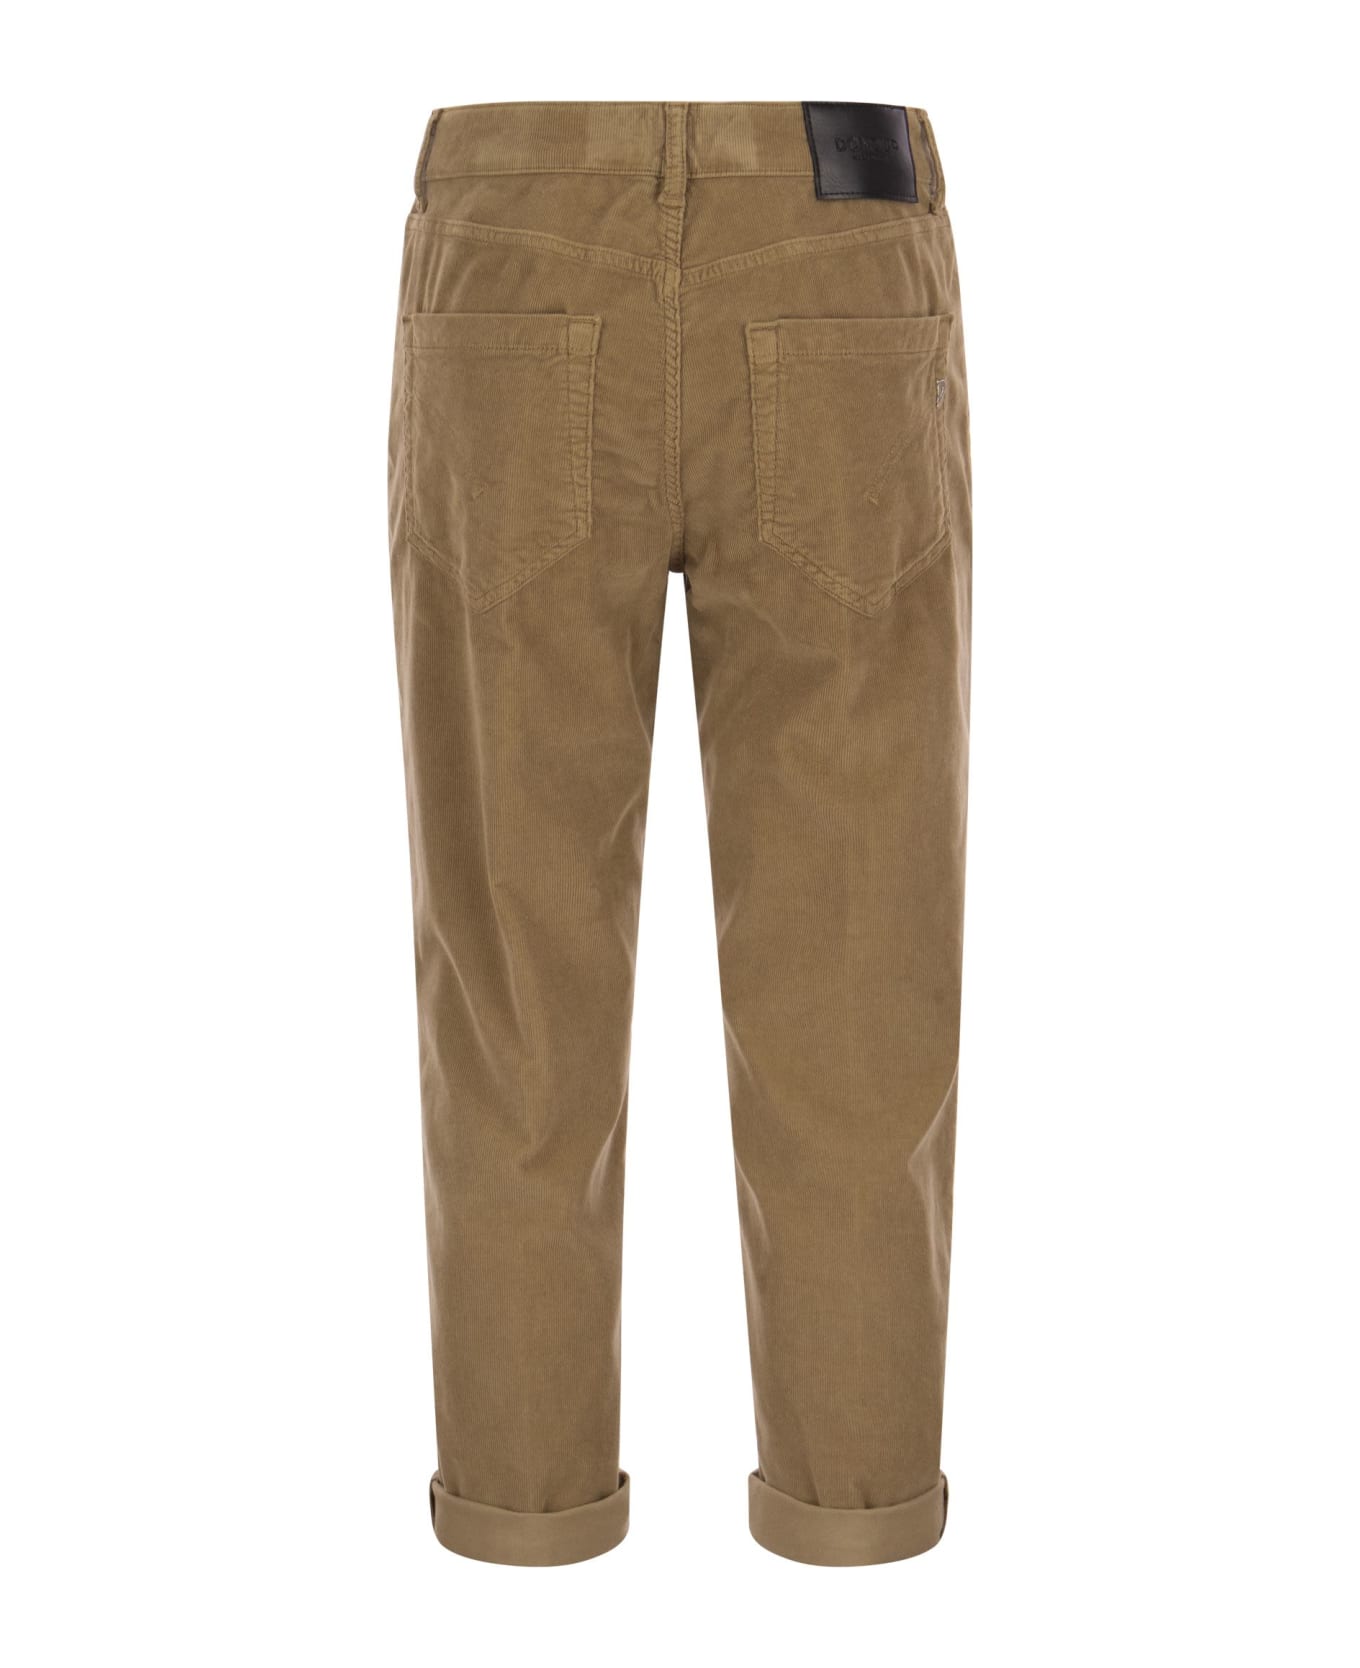 Dondup Koons - Multi-striped Velvet Trousers With Jewelled Buttons - Camel